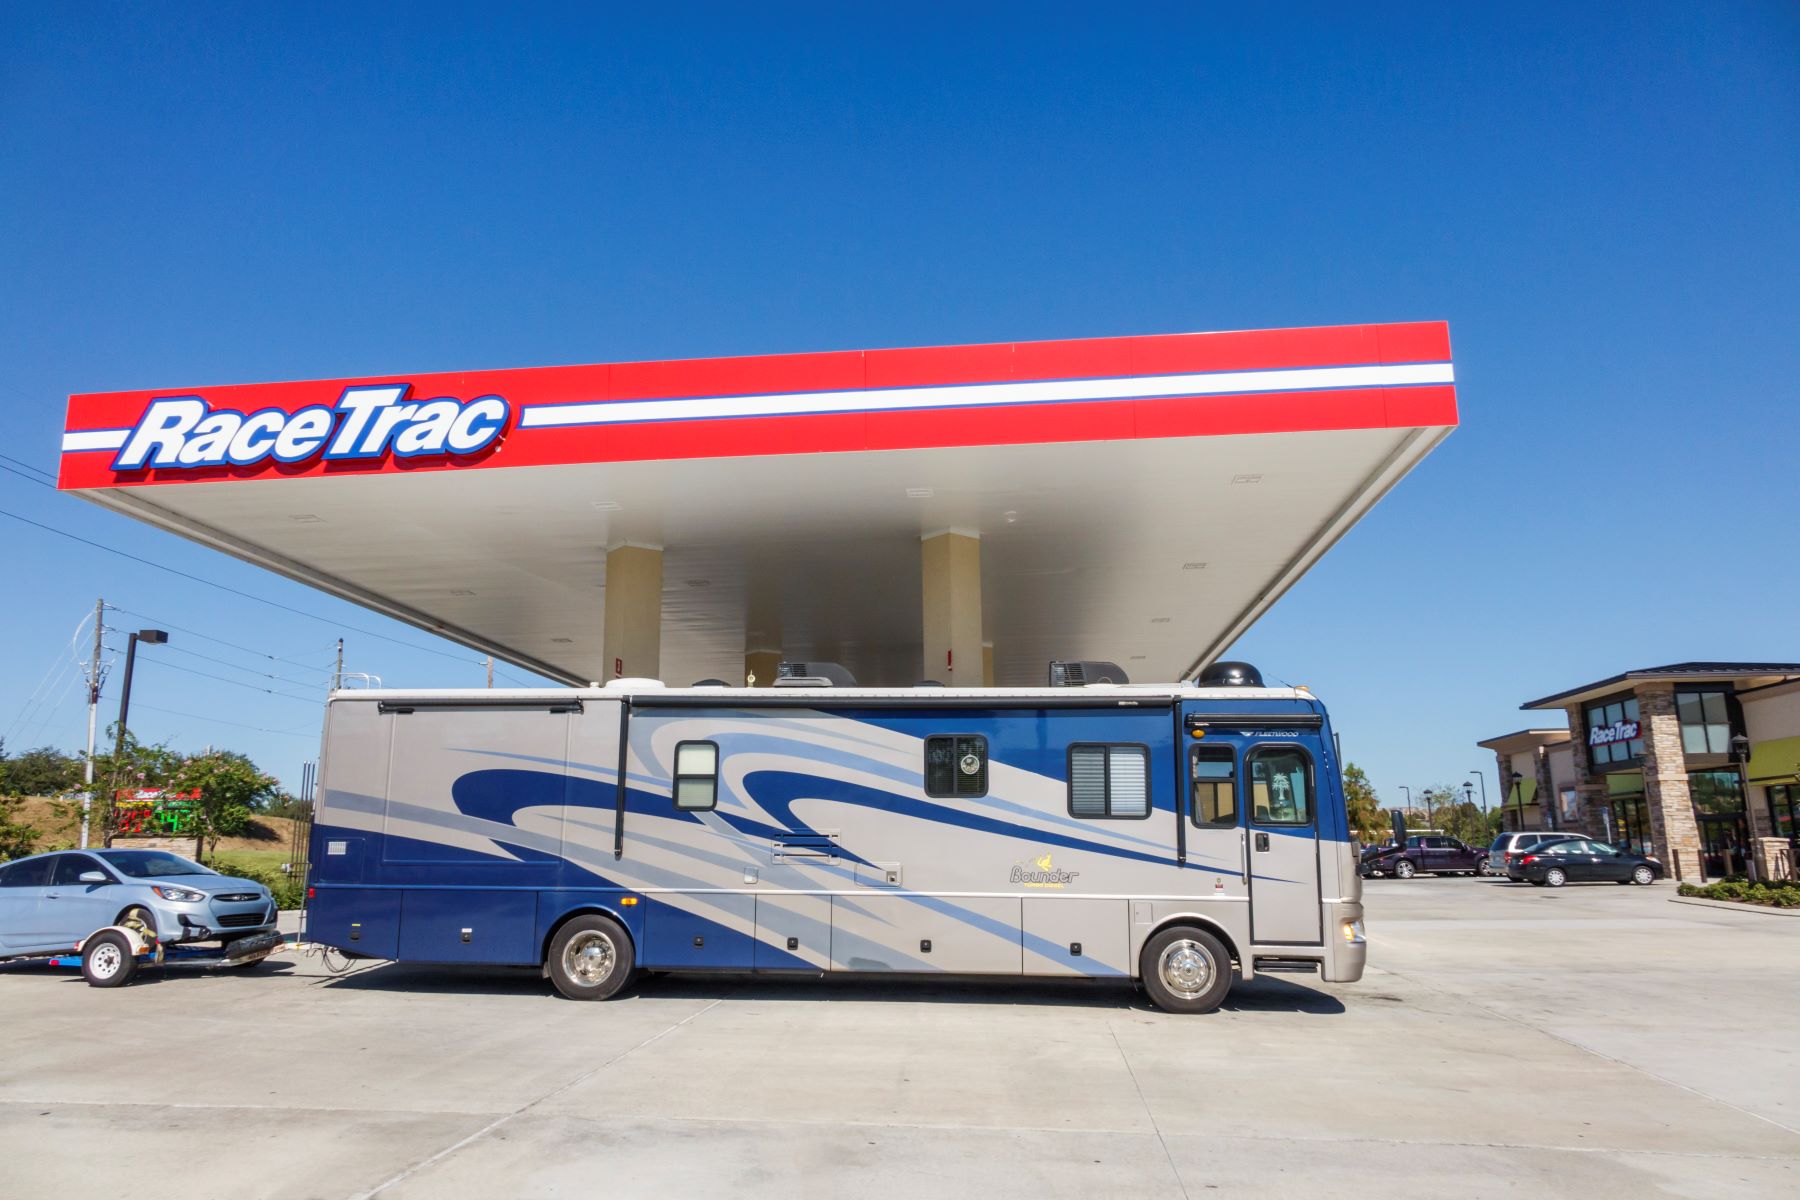 An RV refueling at a RaceTrac gas station in Clermont